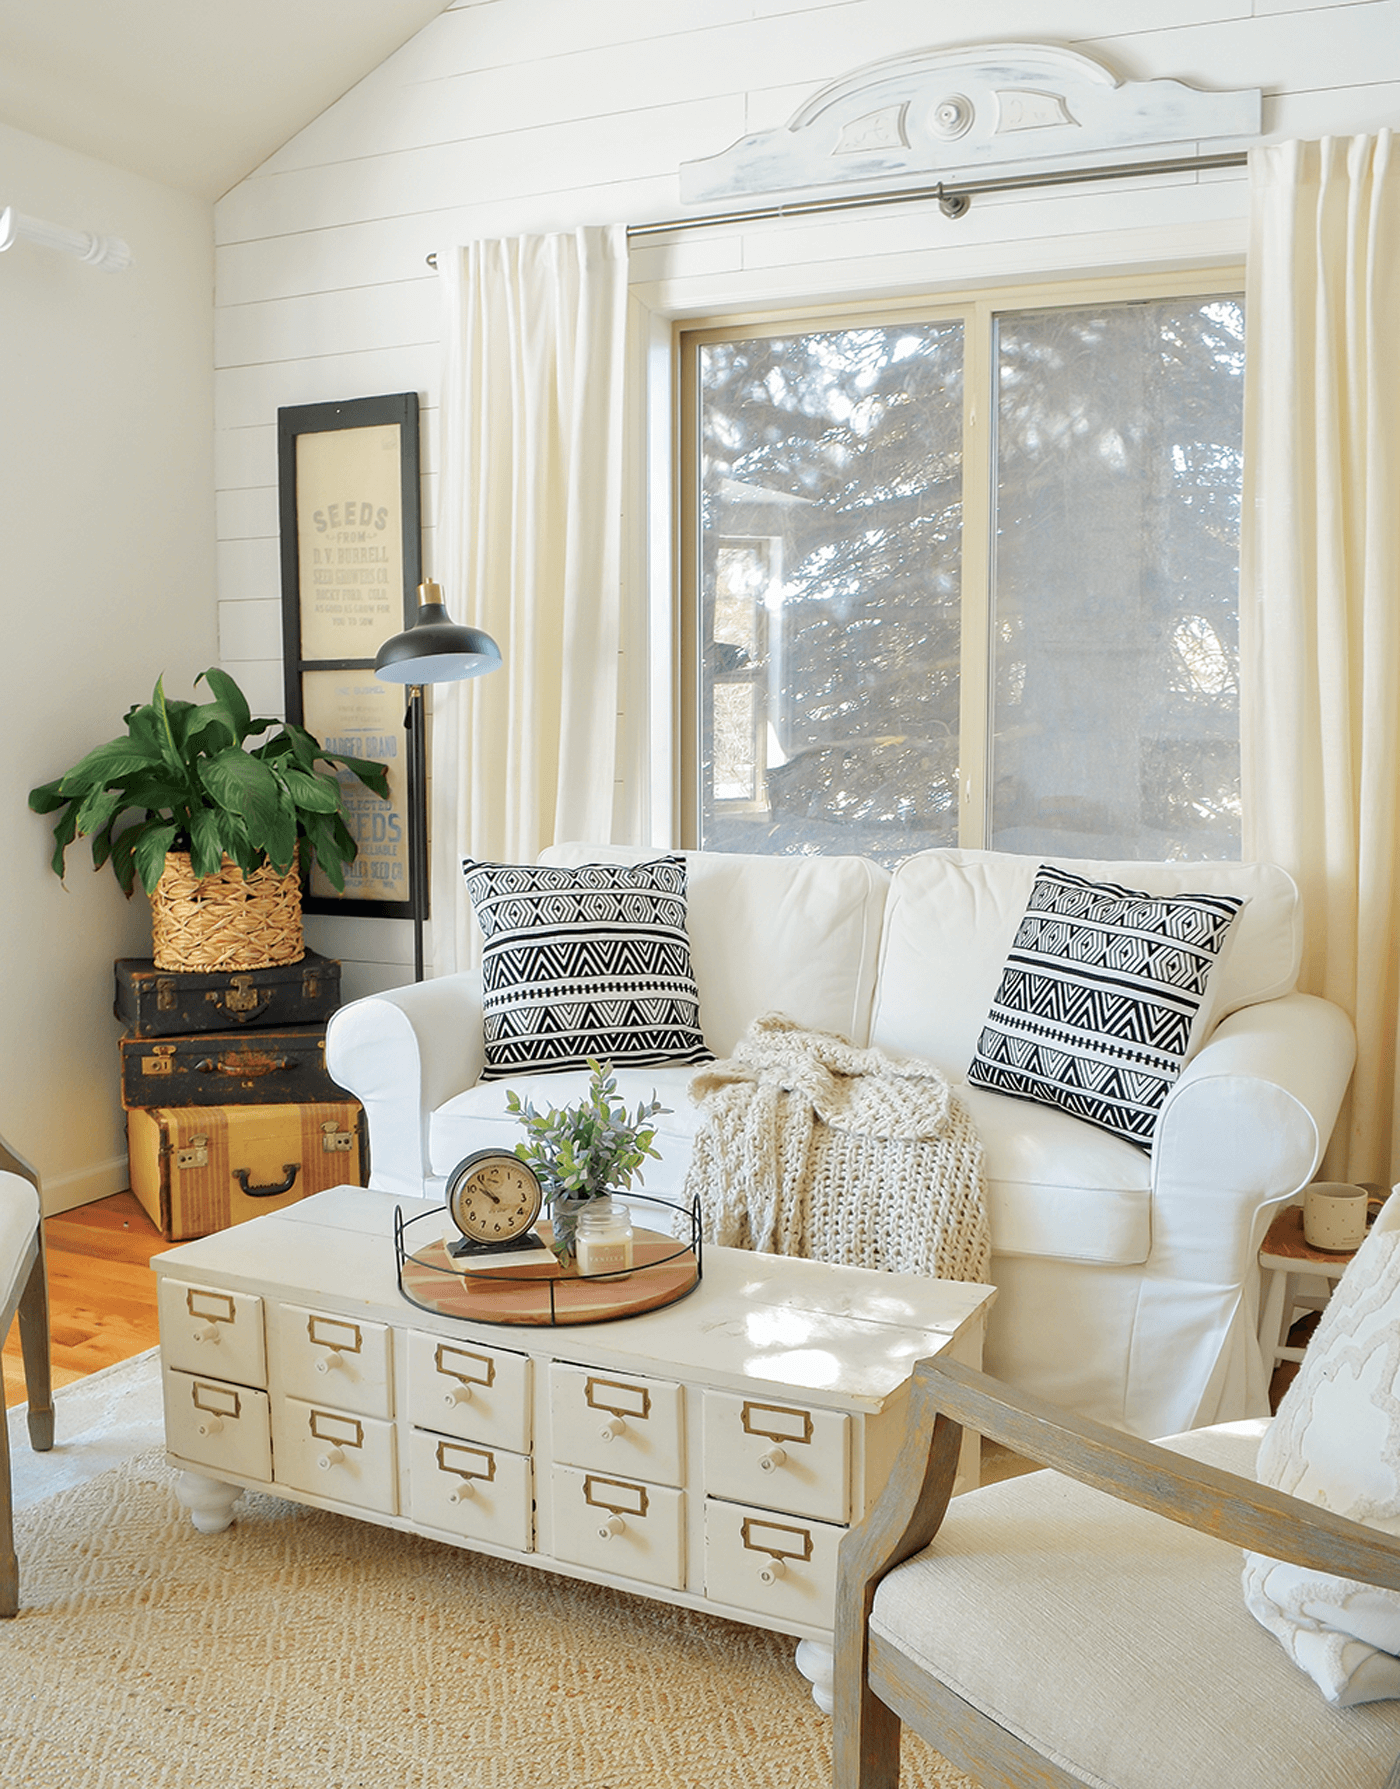 sarah joy blog's Seating area with white couch, plants, and throw pillows against a window